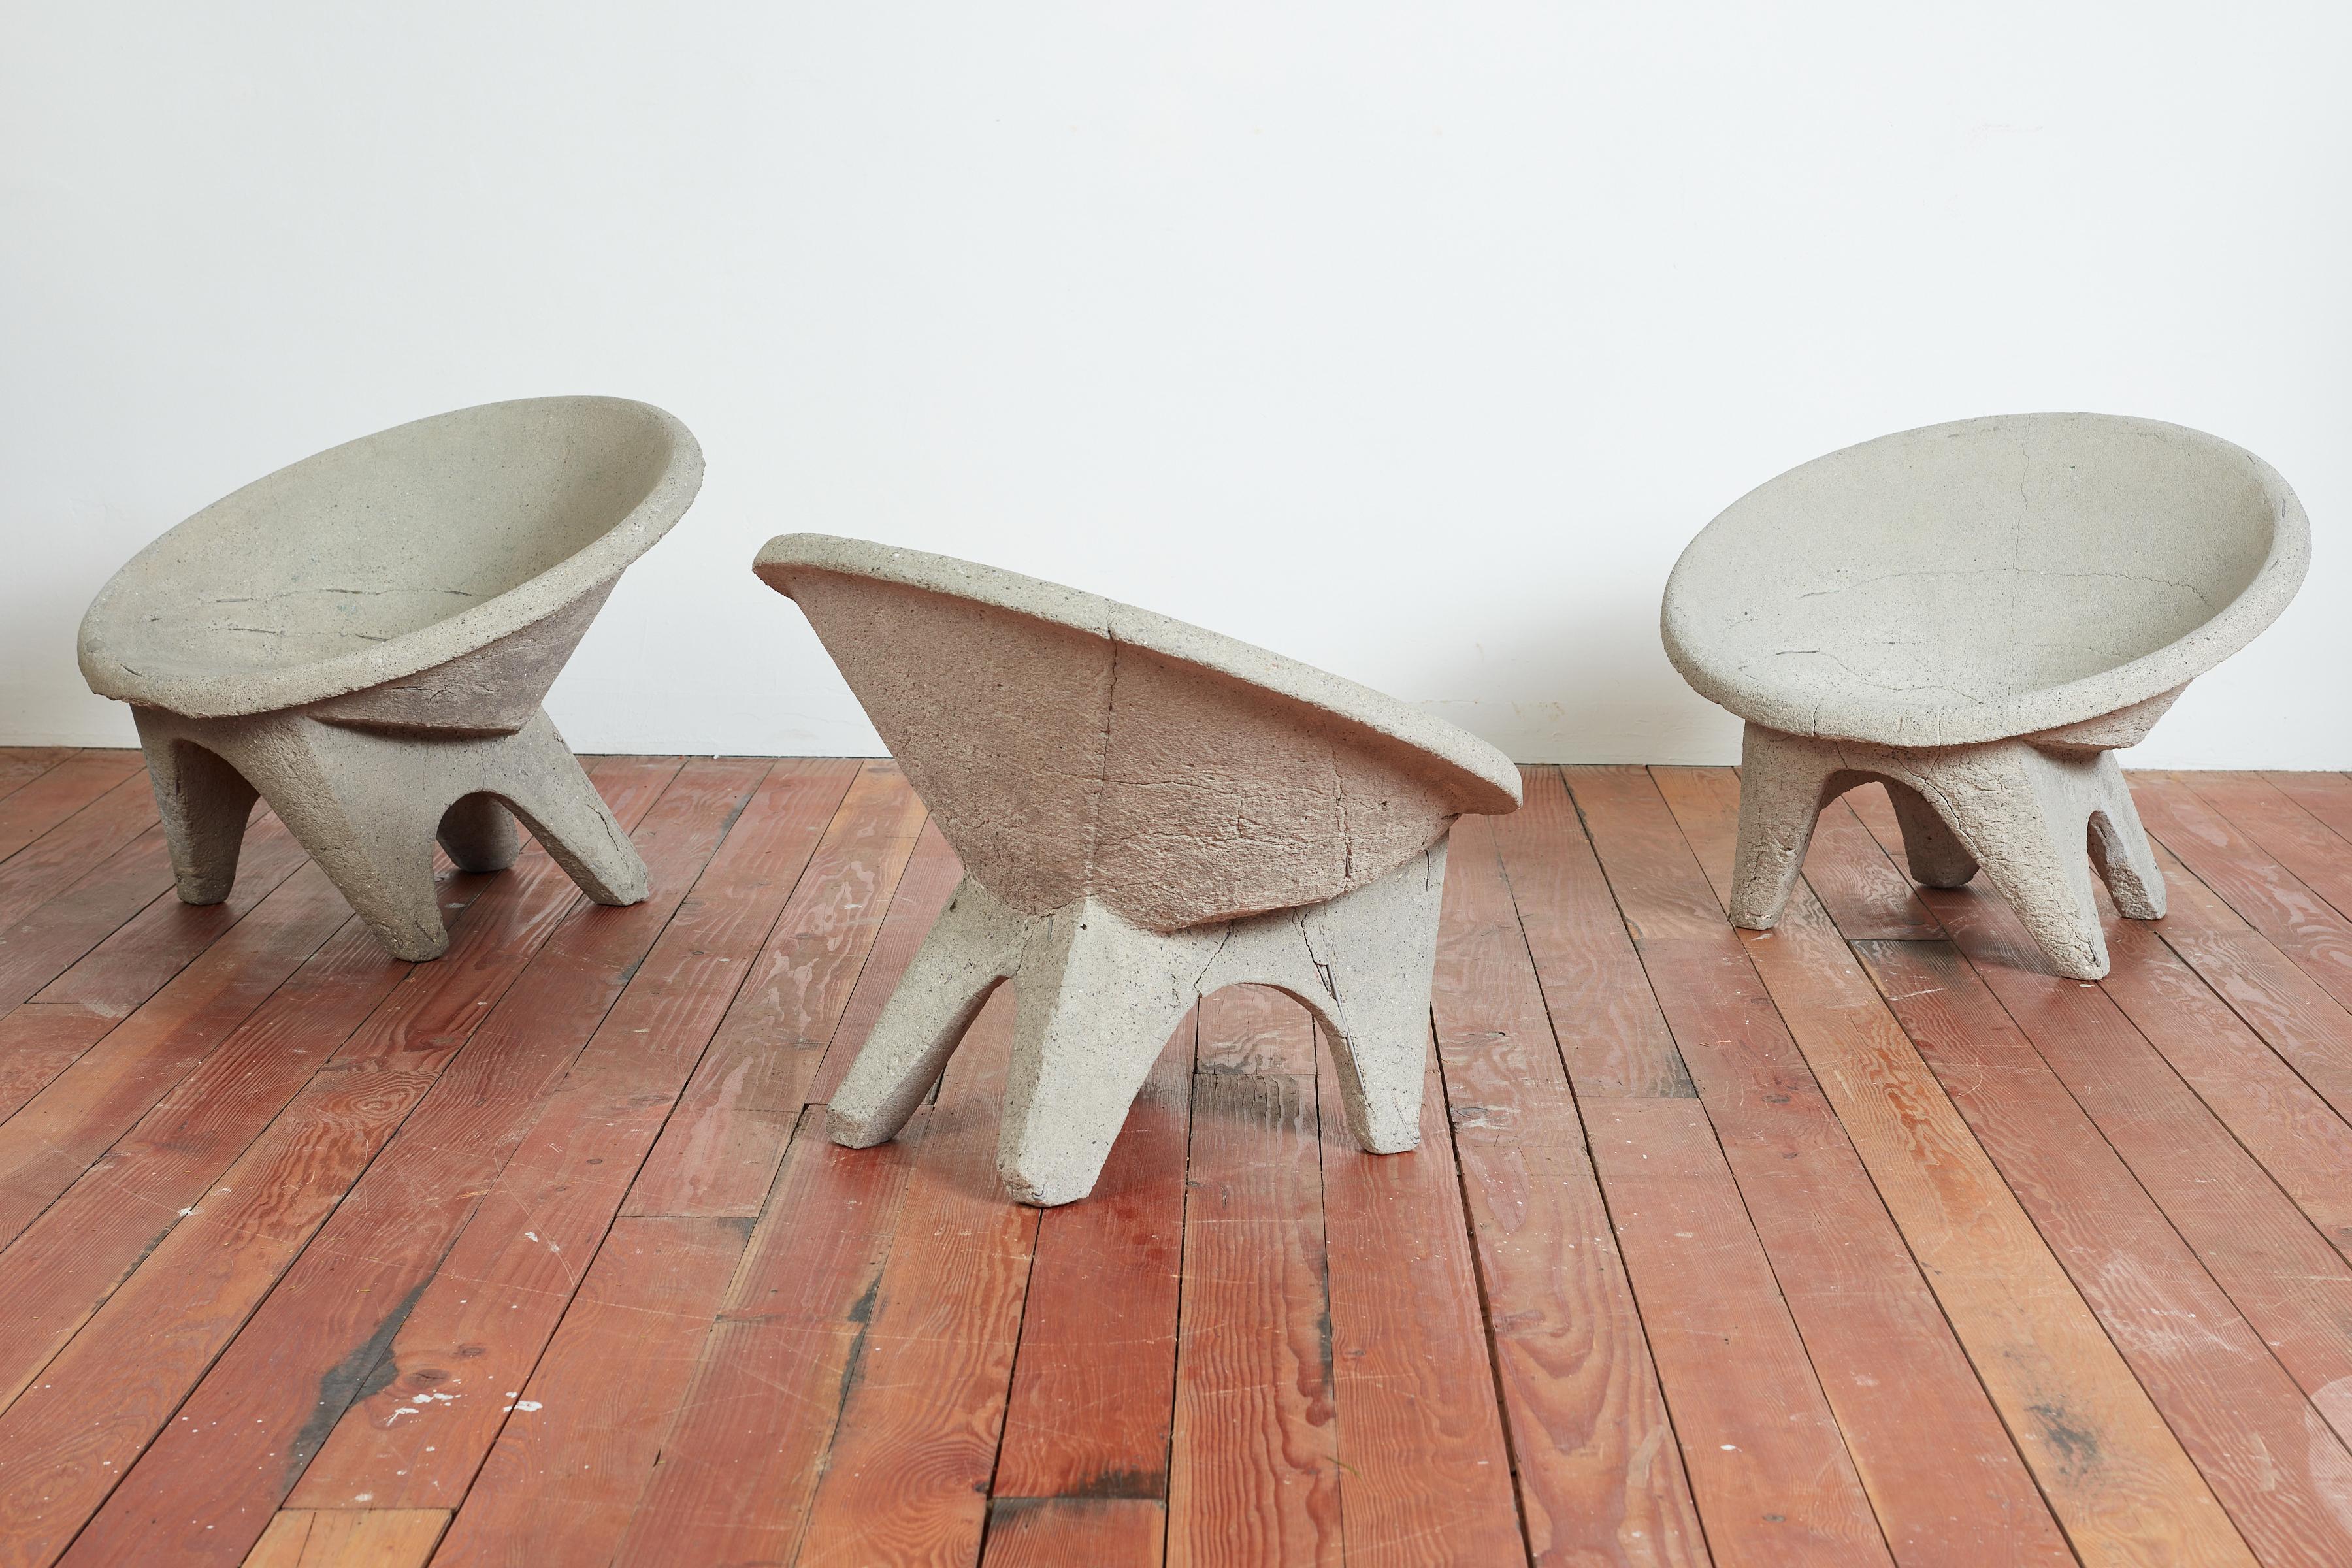 Concrete sculptural chairs - originally from Italy, 1960s
These are vintage - with great raw patina 
Chairs are sold individually. 